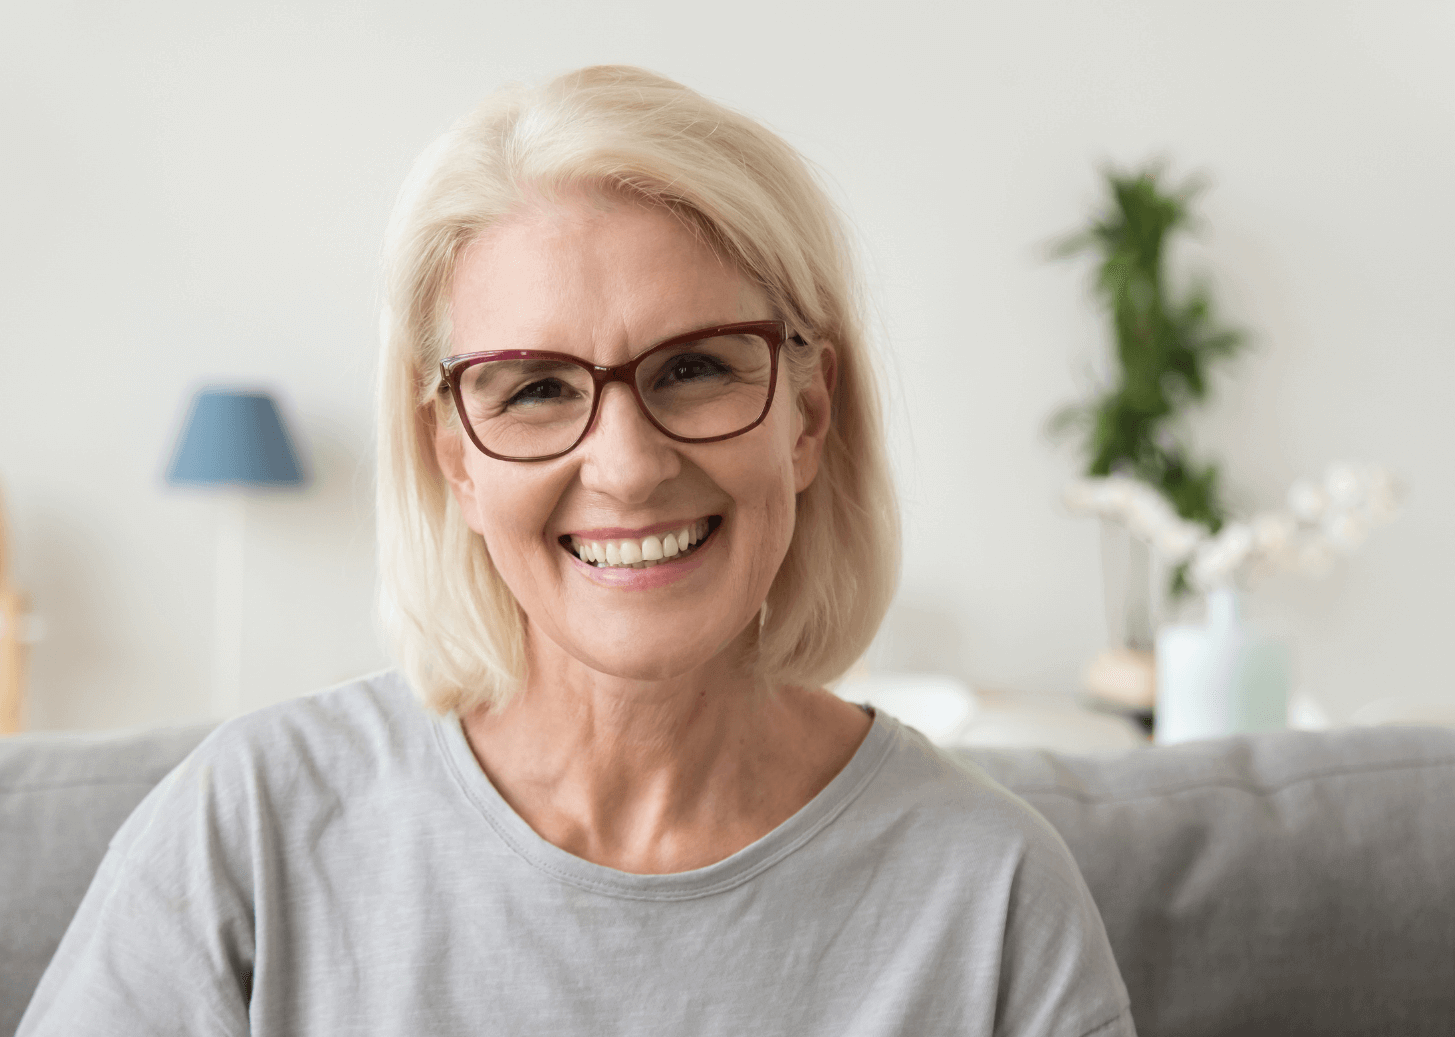 Lady with glasses smiling with her new smile thanks to dental implants